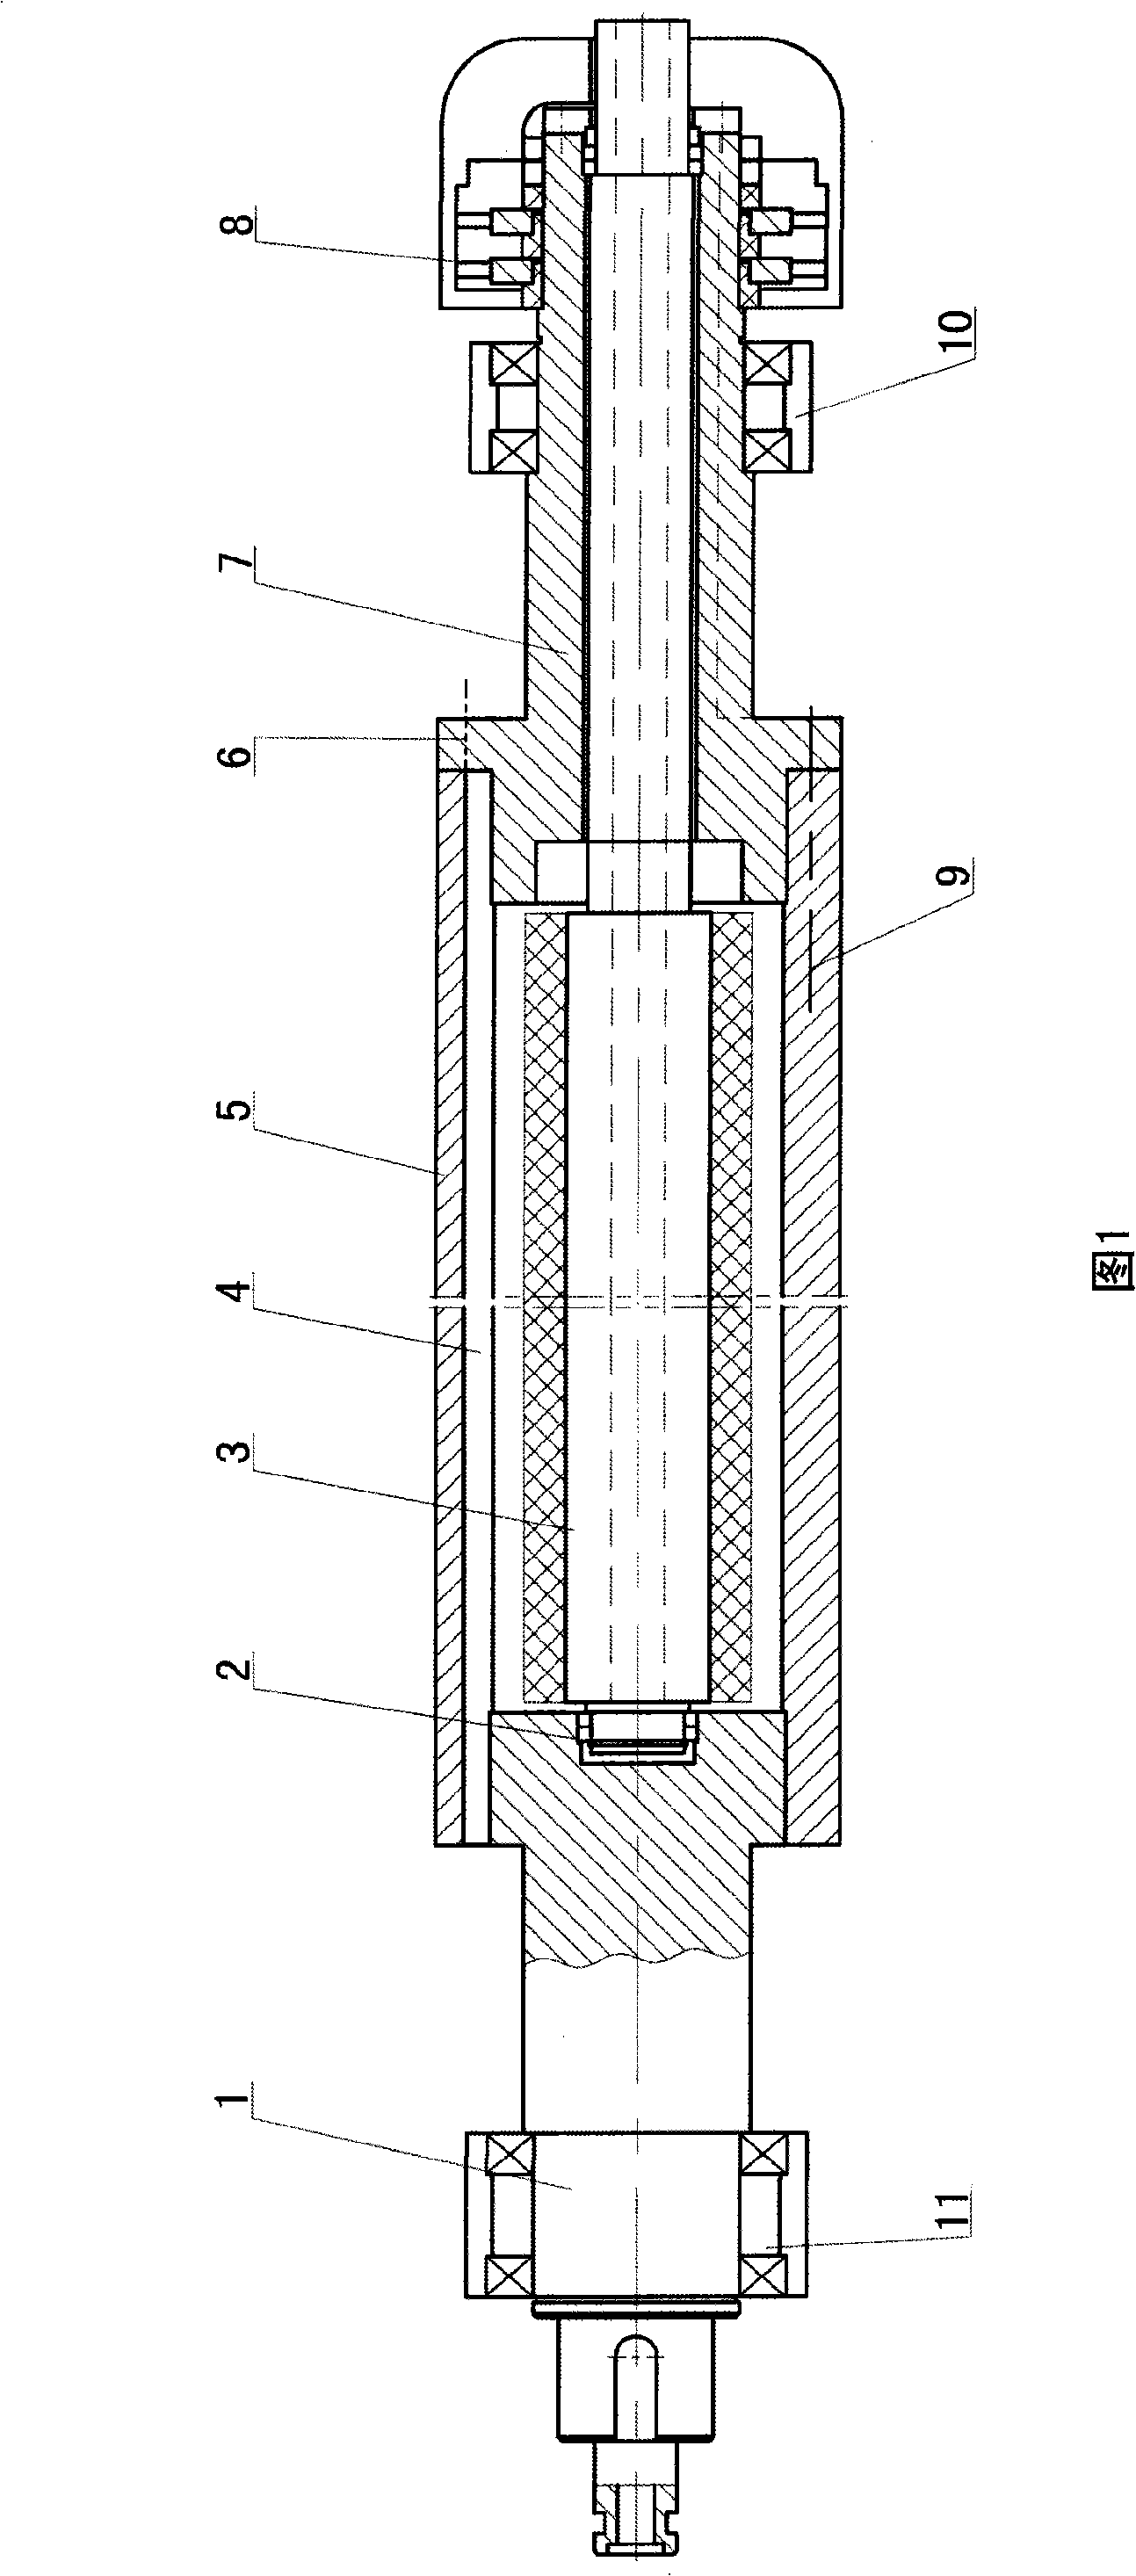 Hyperacoustic frequency electromagnetic bowl energy-saving heating apparatus